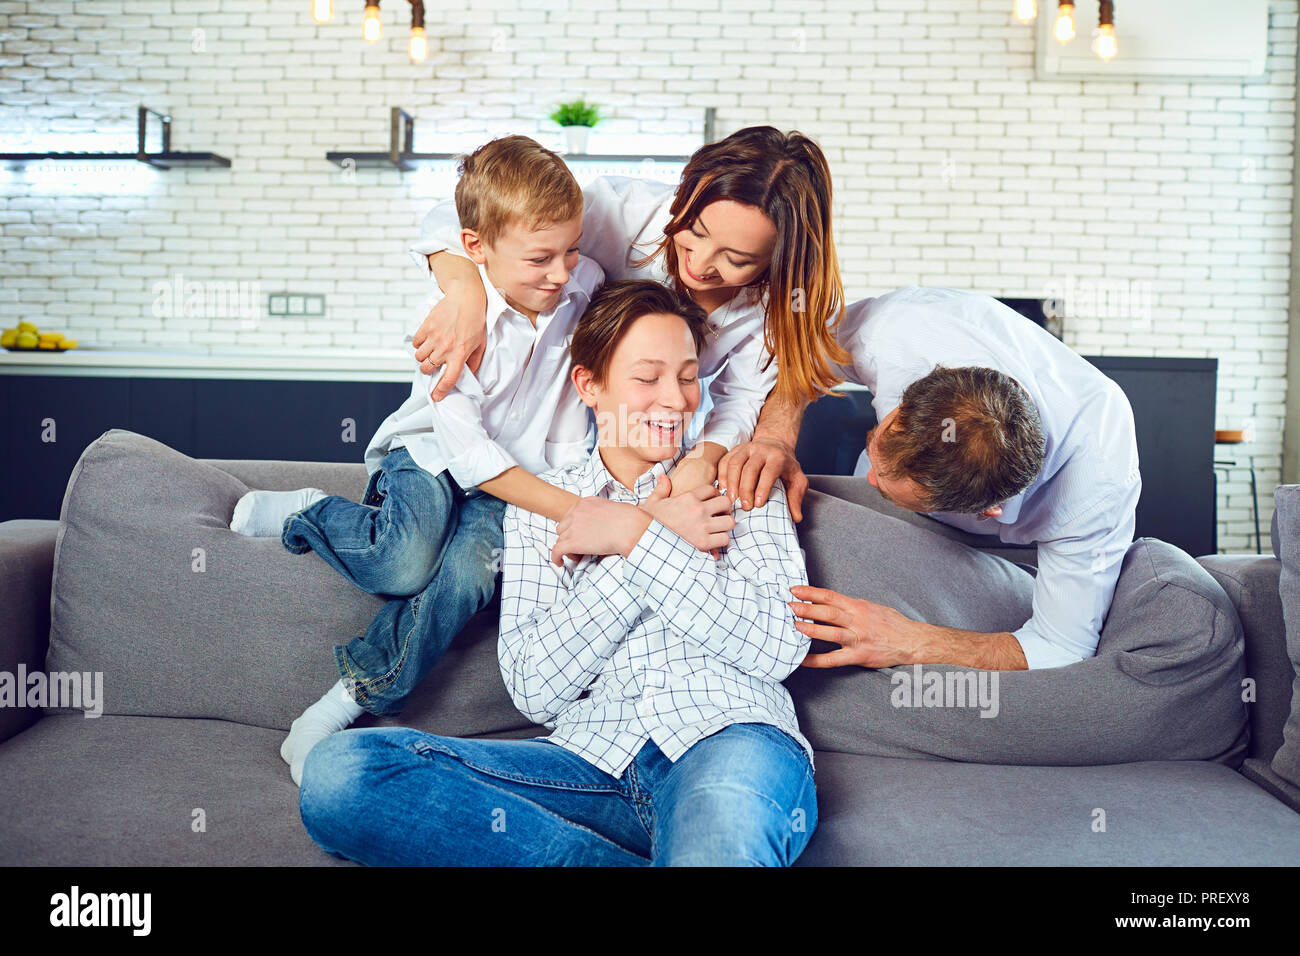 Happy family having fun playing together on a couch Stock Photo